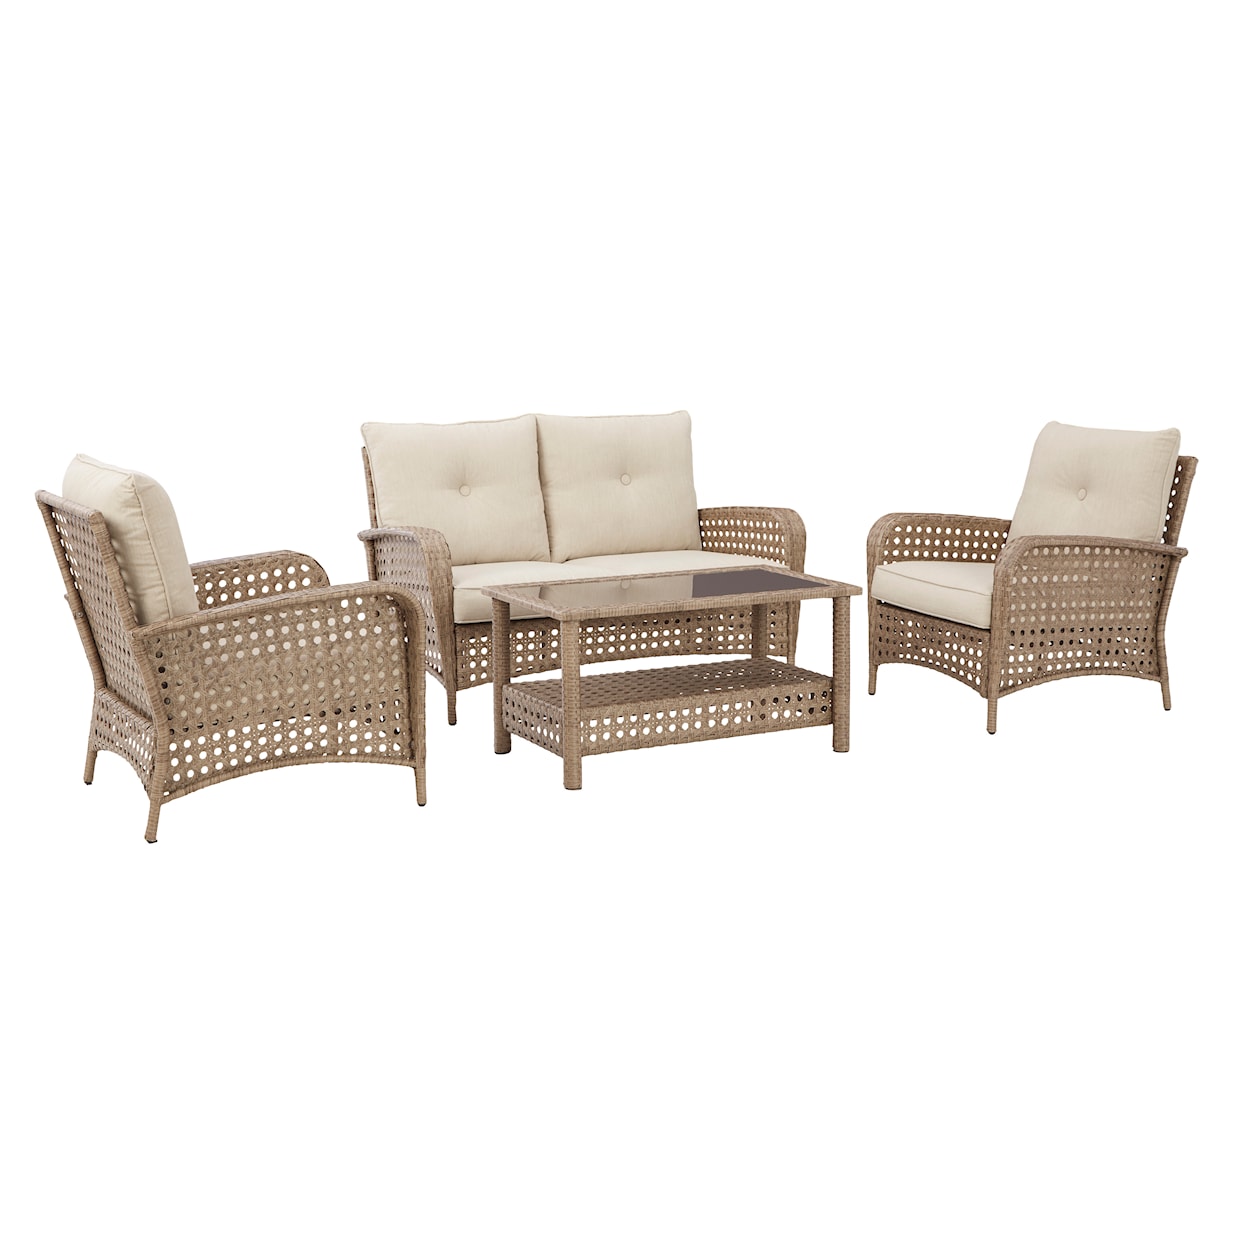 Signature Design by Ashley Braylee Outdoor Conversation Sets/Outdoor Chat Sets